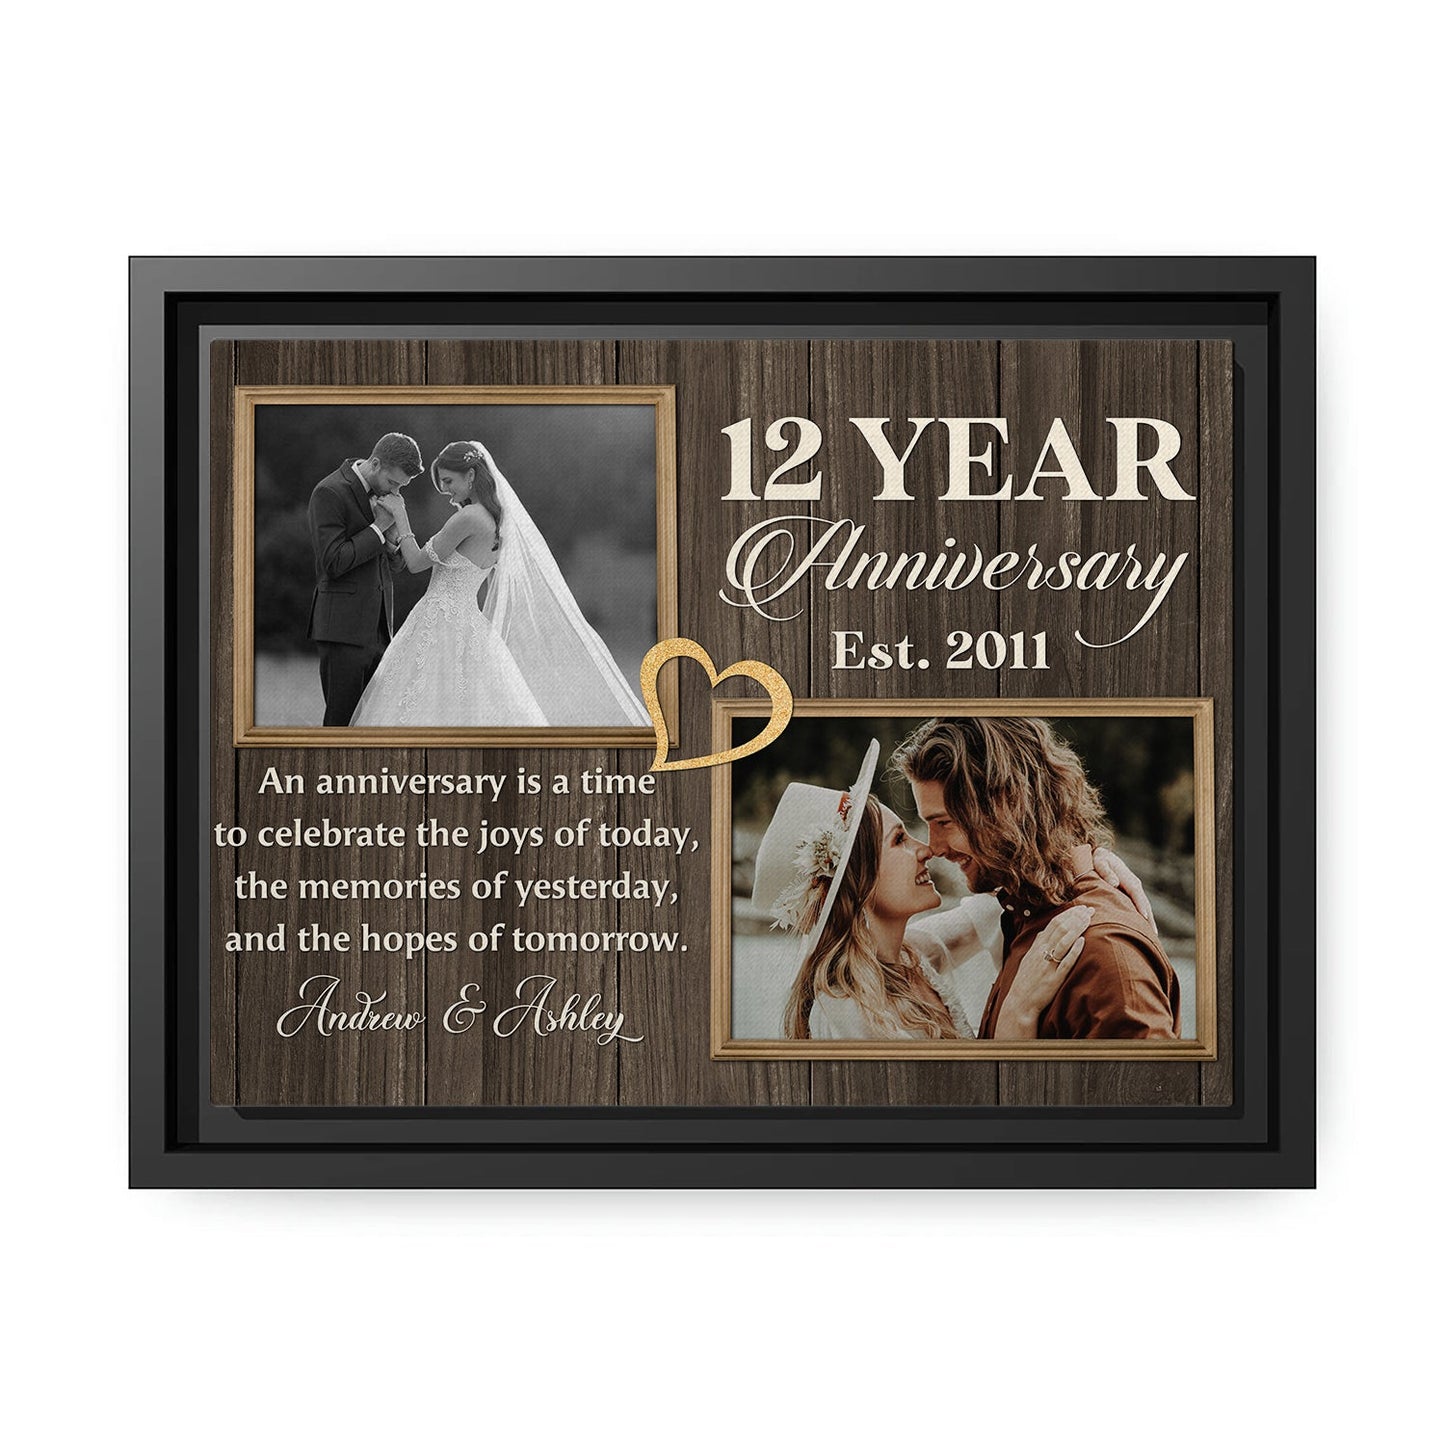 12 Year Anniversary - Personalized 12 Year Anniversary gift for Husband or Wife - Custom Canvas Print - MyMindfulGifts